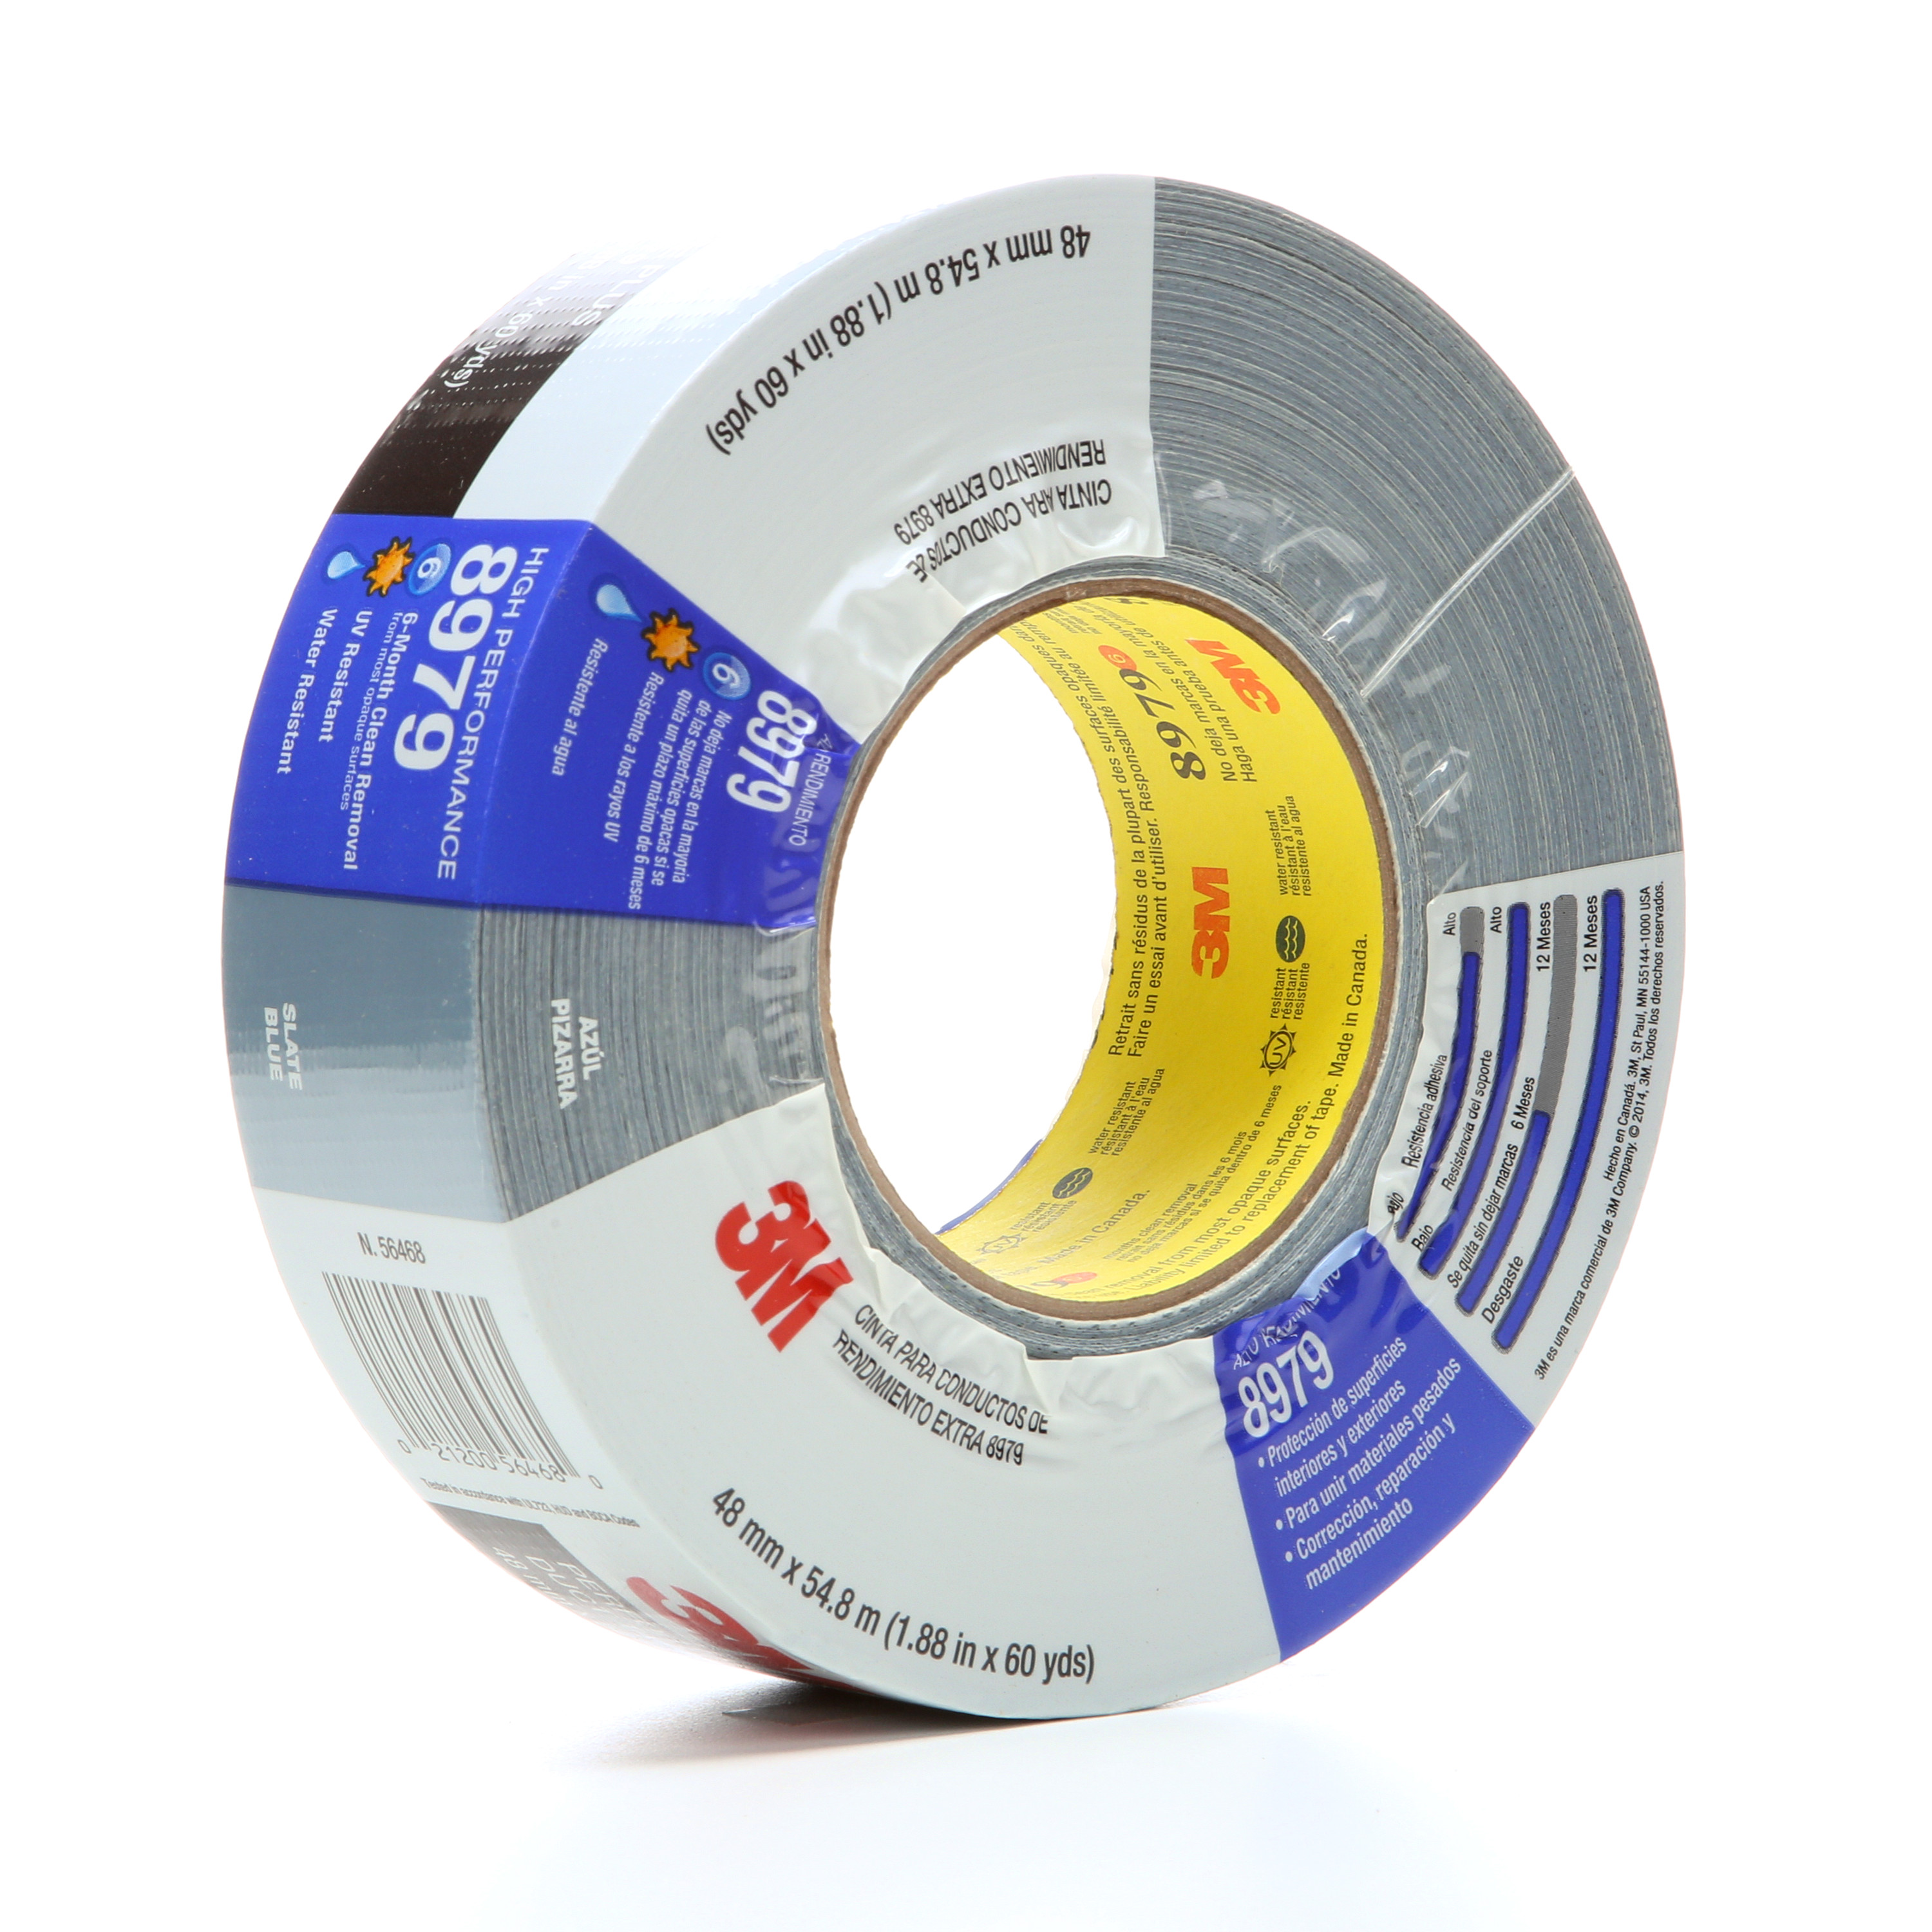 3M™ Performance Plus Duct Tape 8979 Slate Blue, 48 mm x 22.8 m 12.1 mil,
12 per case, Conveniently Packaged